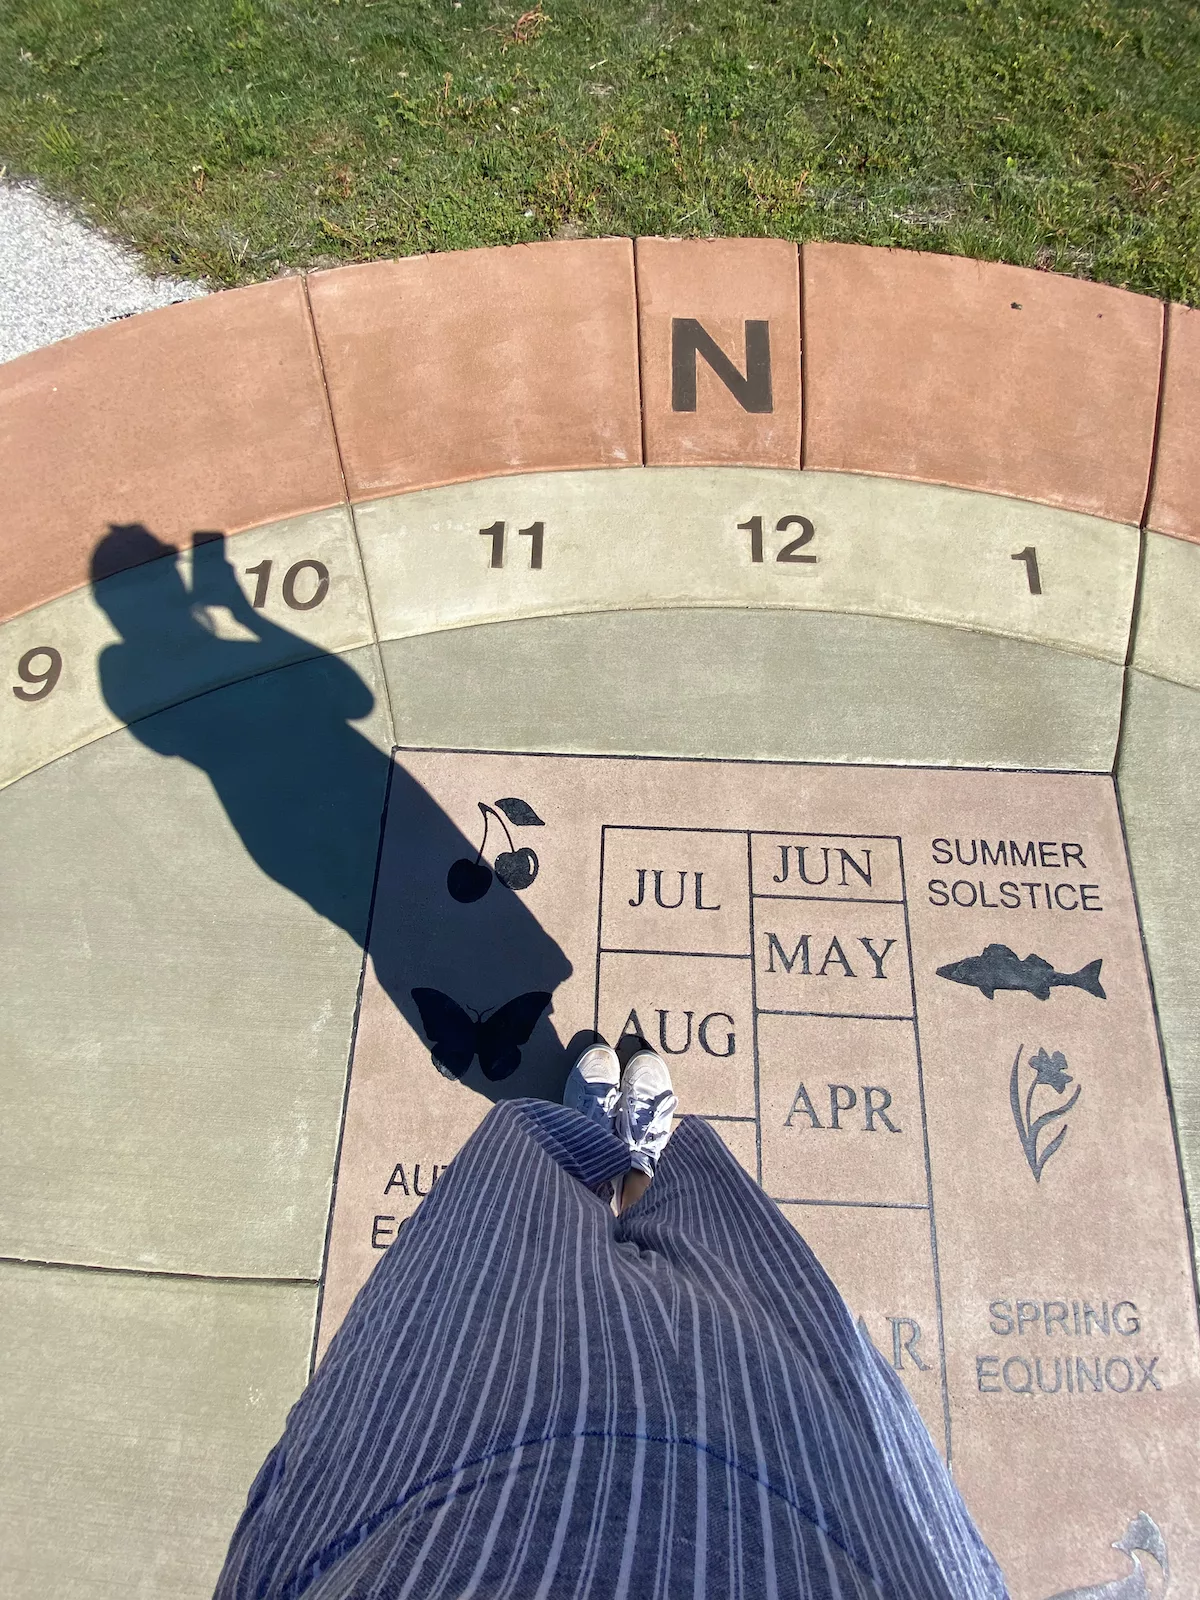 Person standing on Joan and John Evans Legacy Sundial in Lions Park in Janesville, Wisconsin